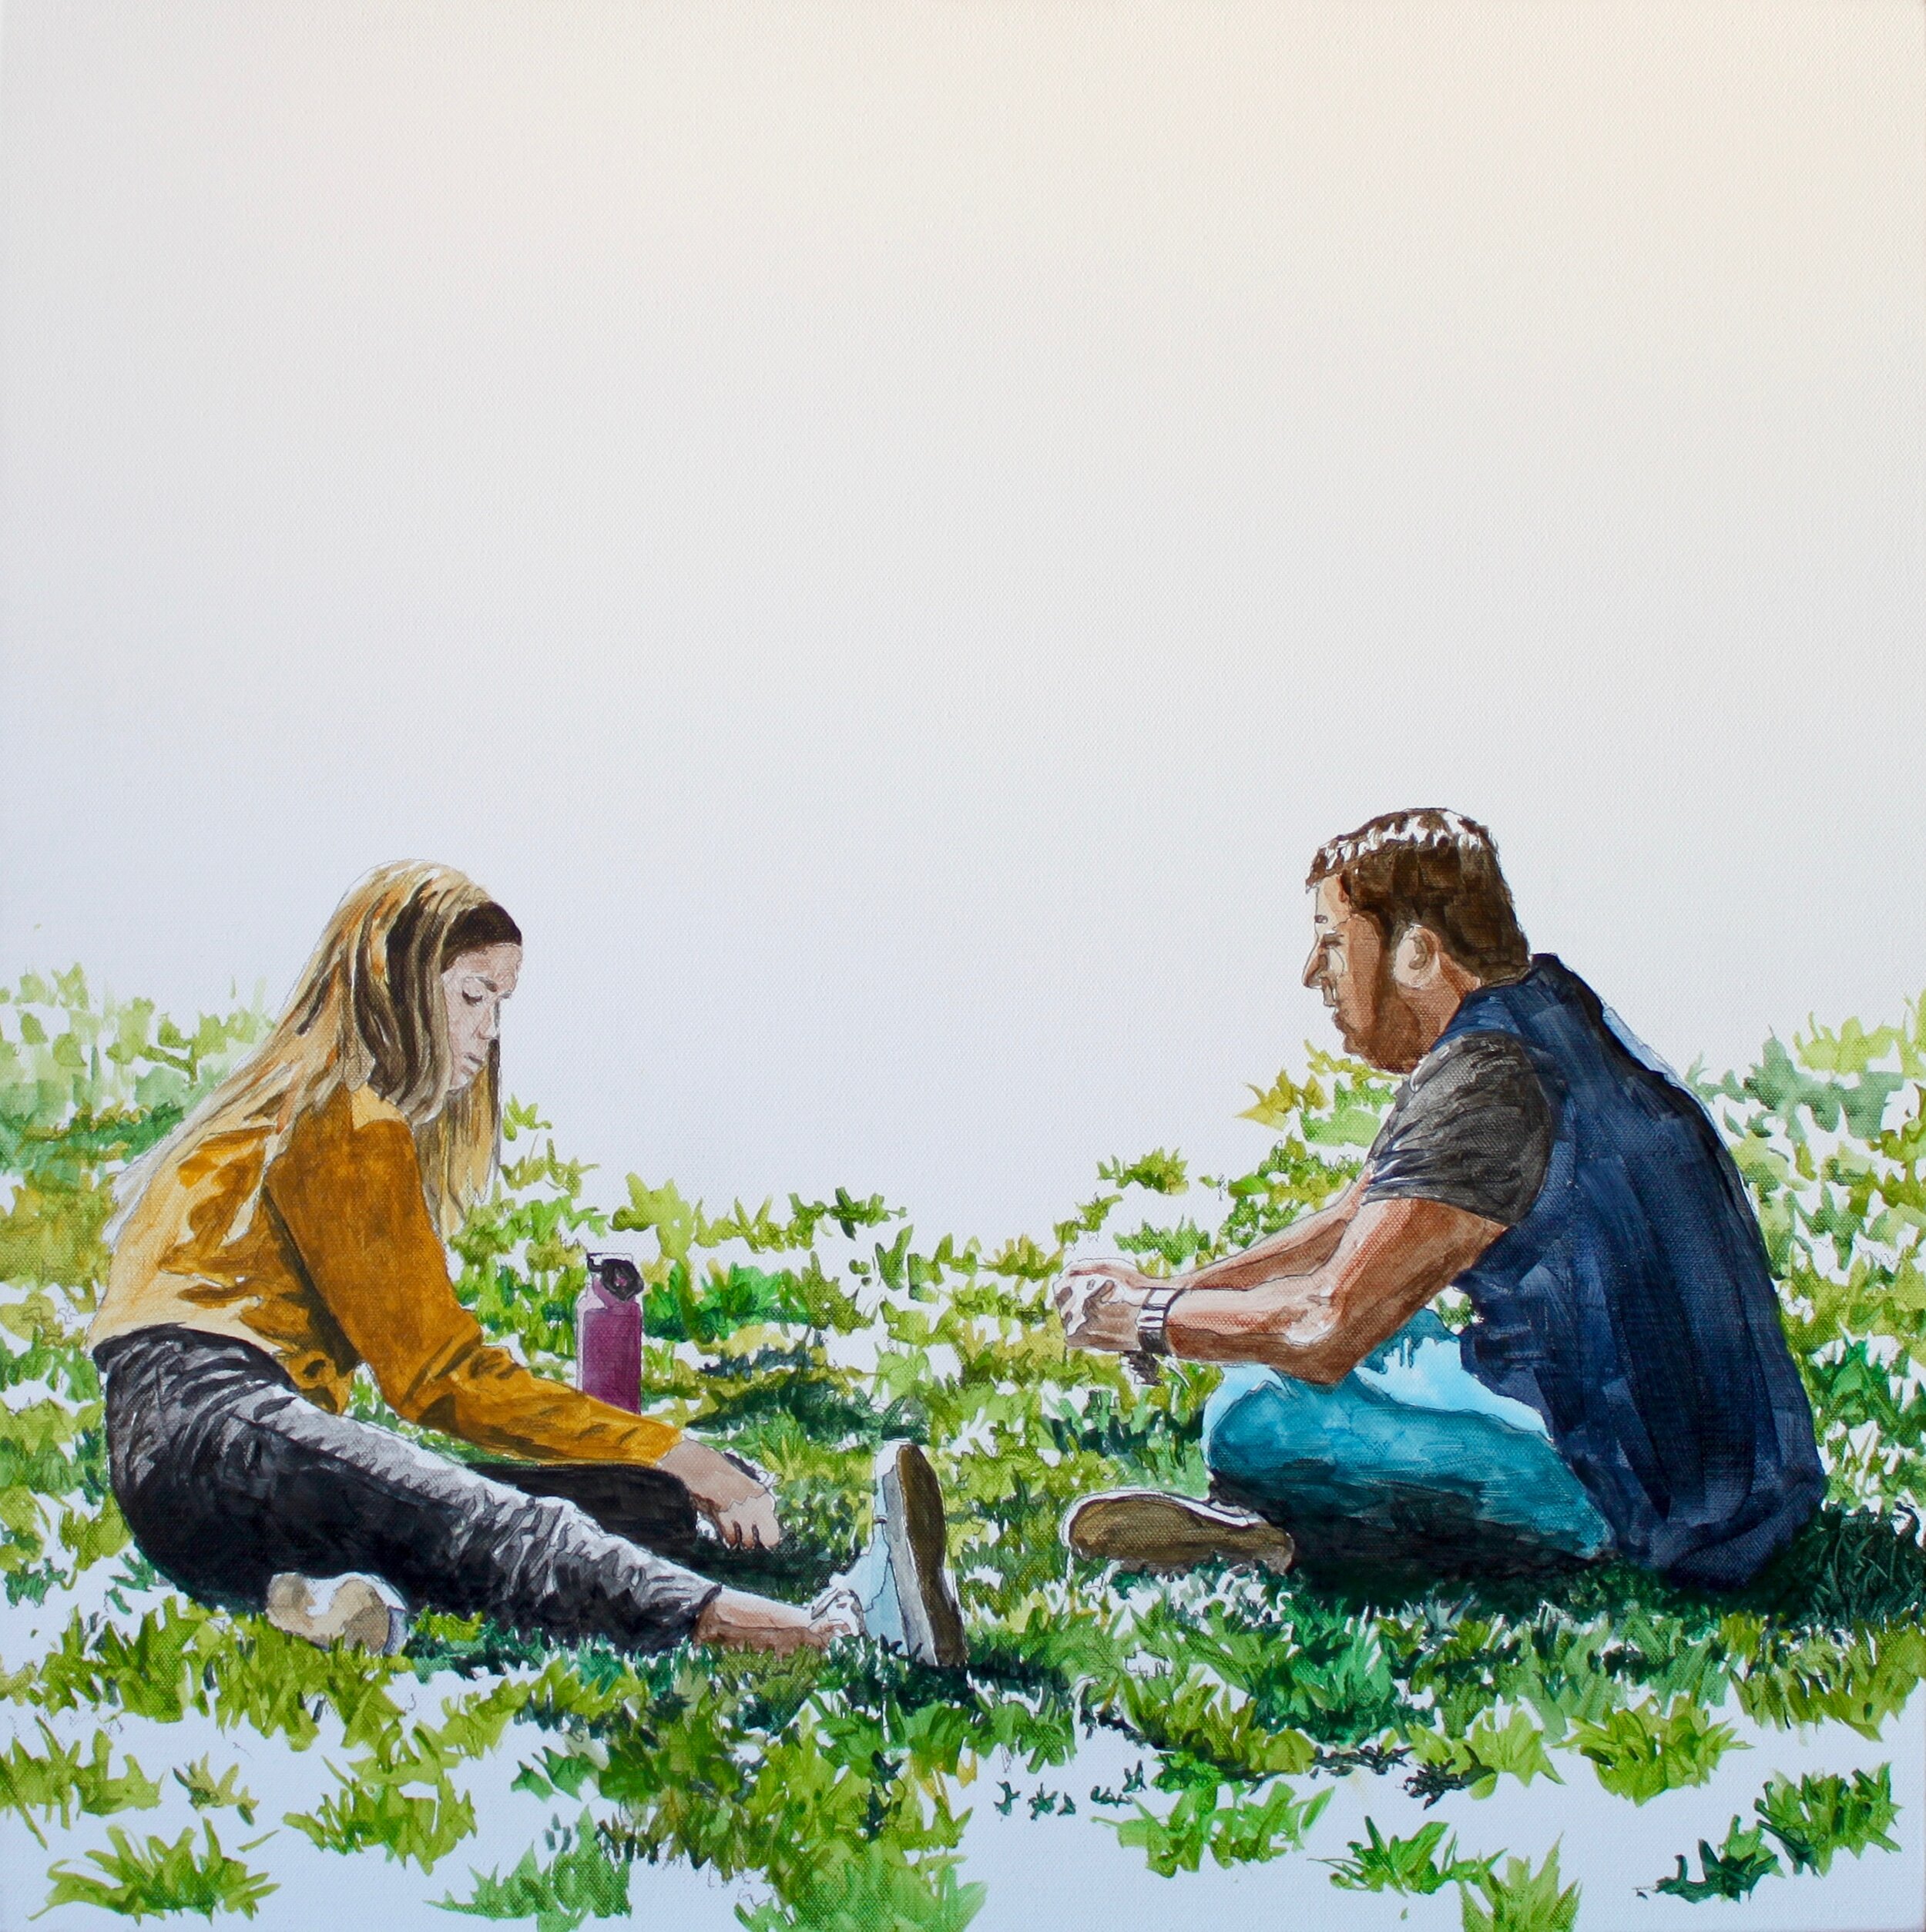 Untitled, People on the Grass, 2020, 24 x 24, acrylic on canvas